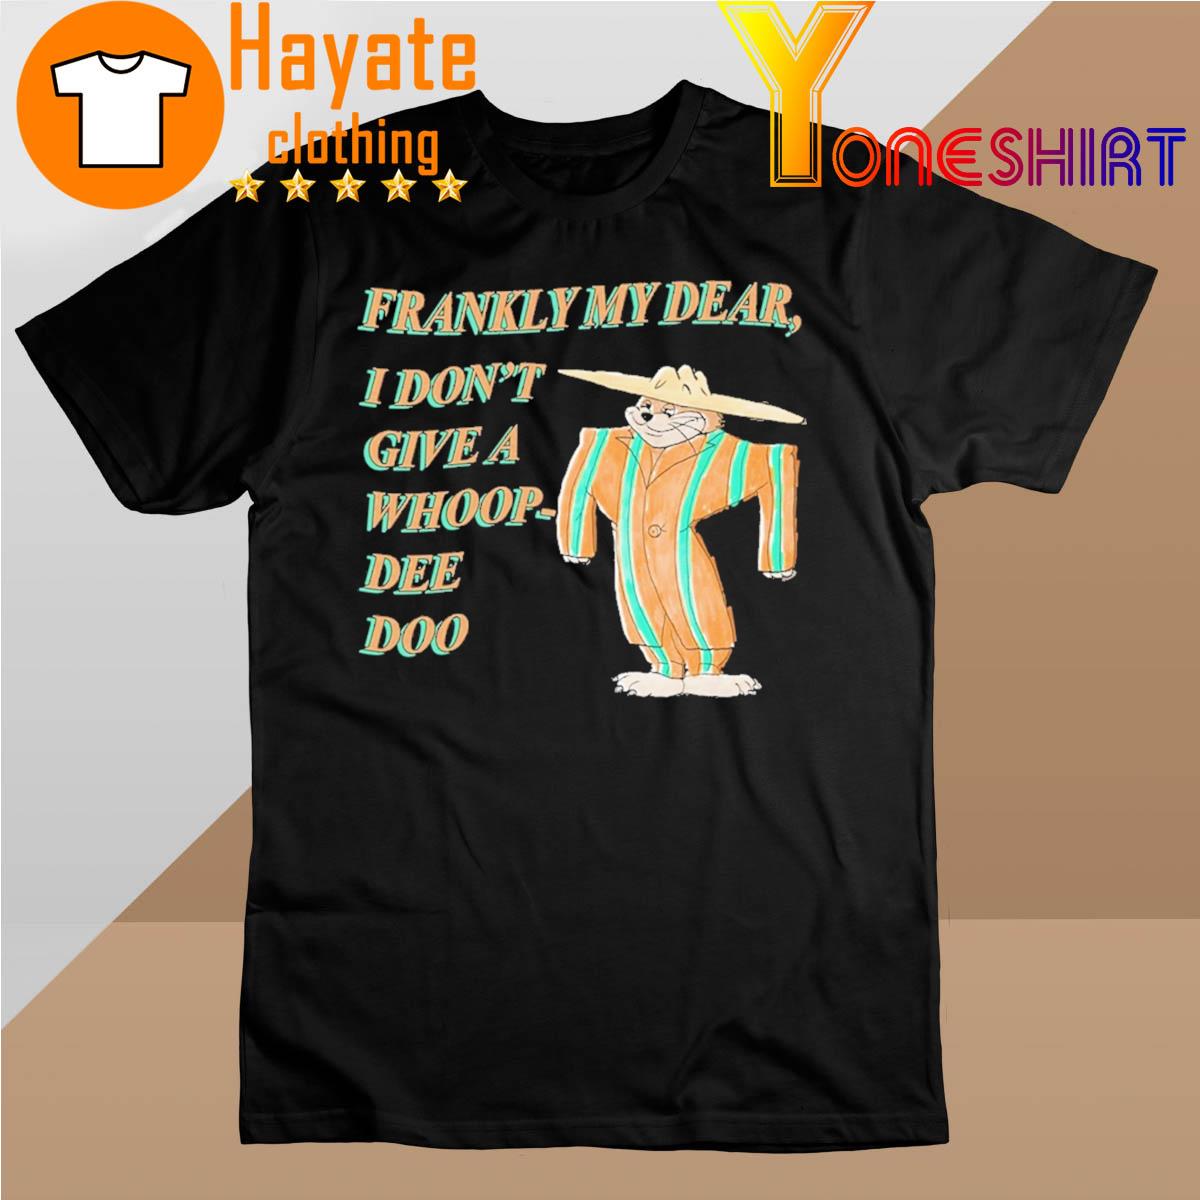 Frankly My Dear I don't give a Whoop Dee Doo shirt